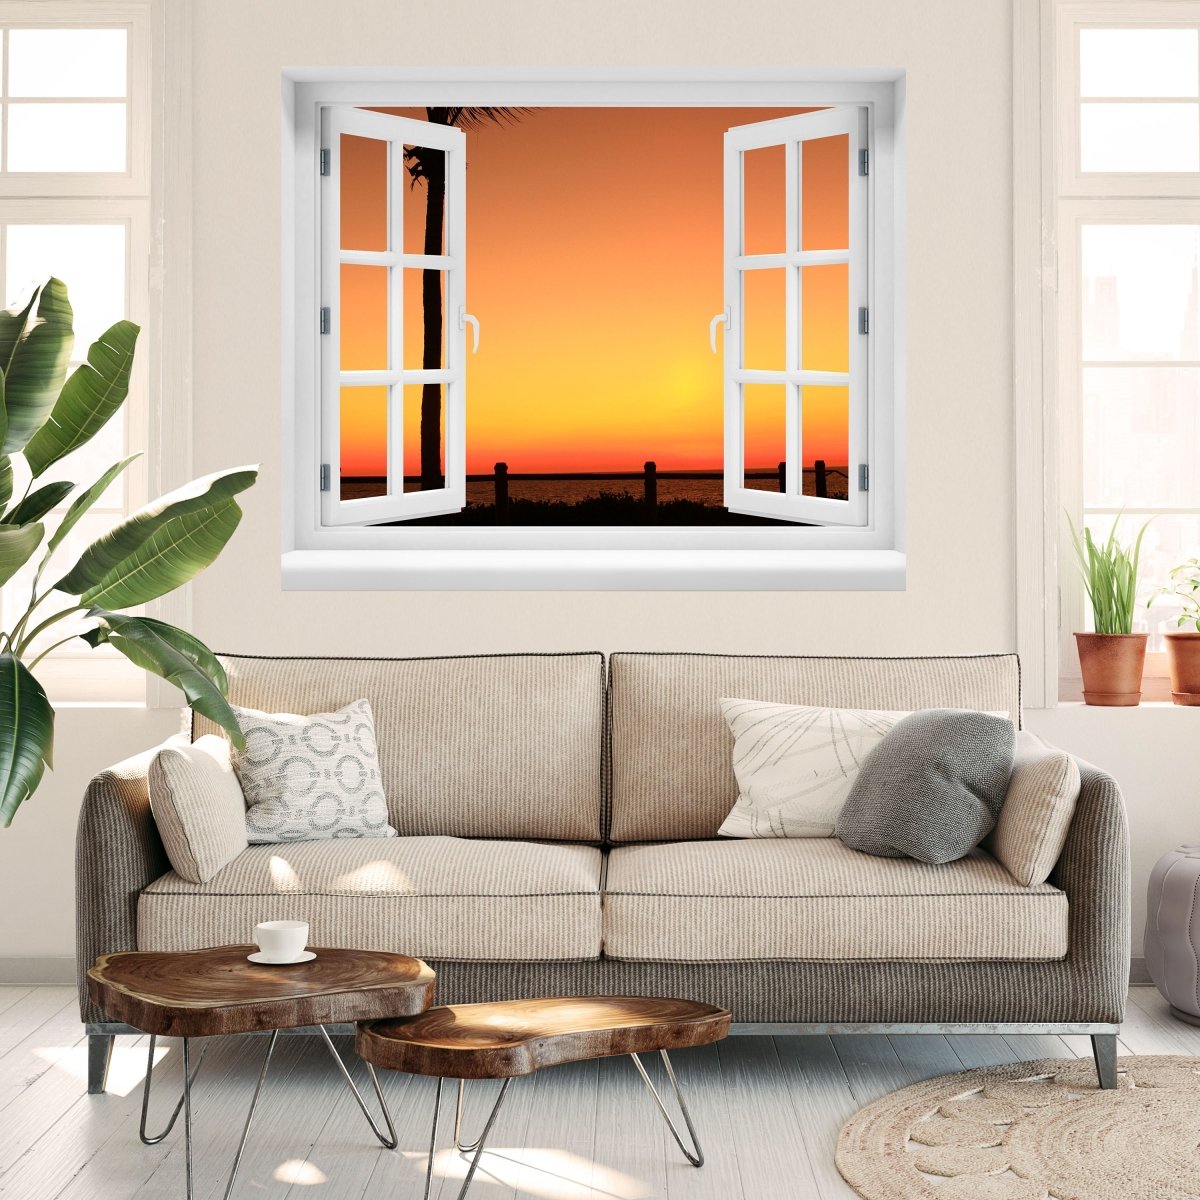 3D Wall Sticker Broome Sunset 2 Nature - Wall Decal M0208